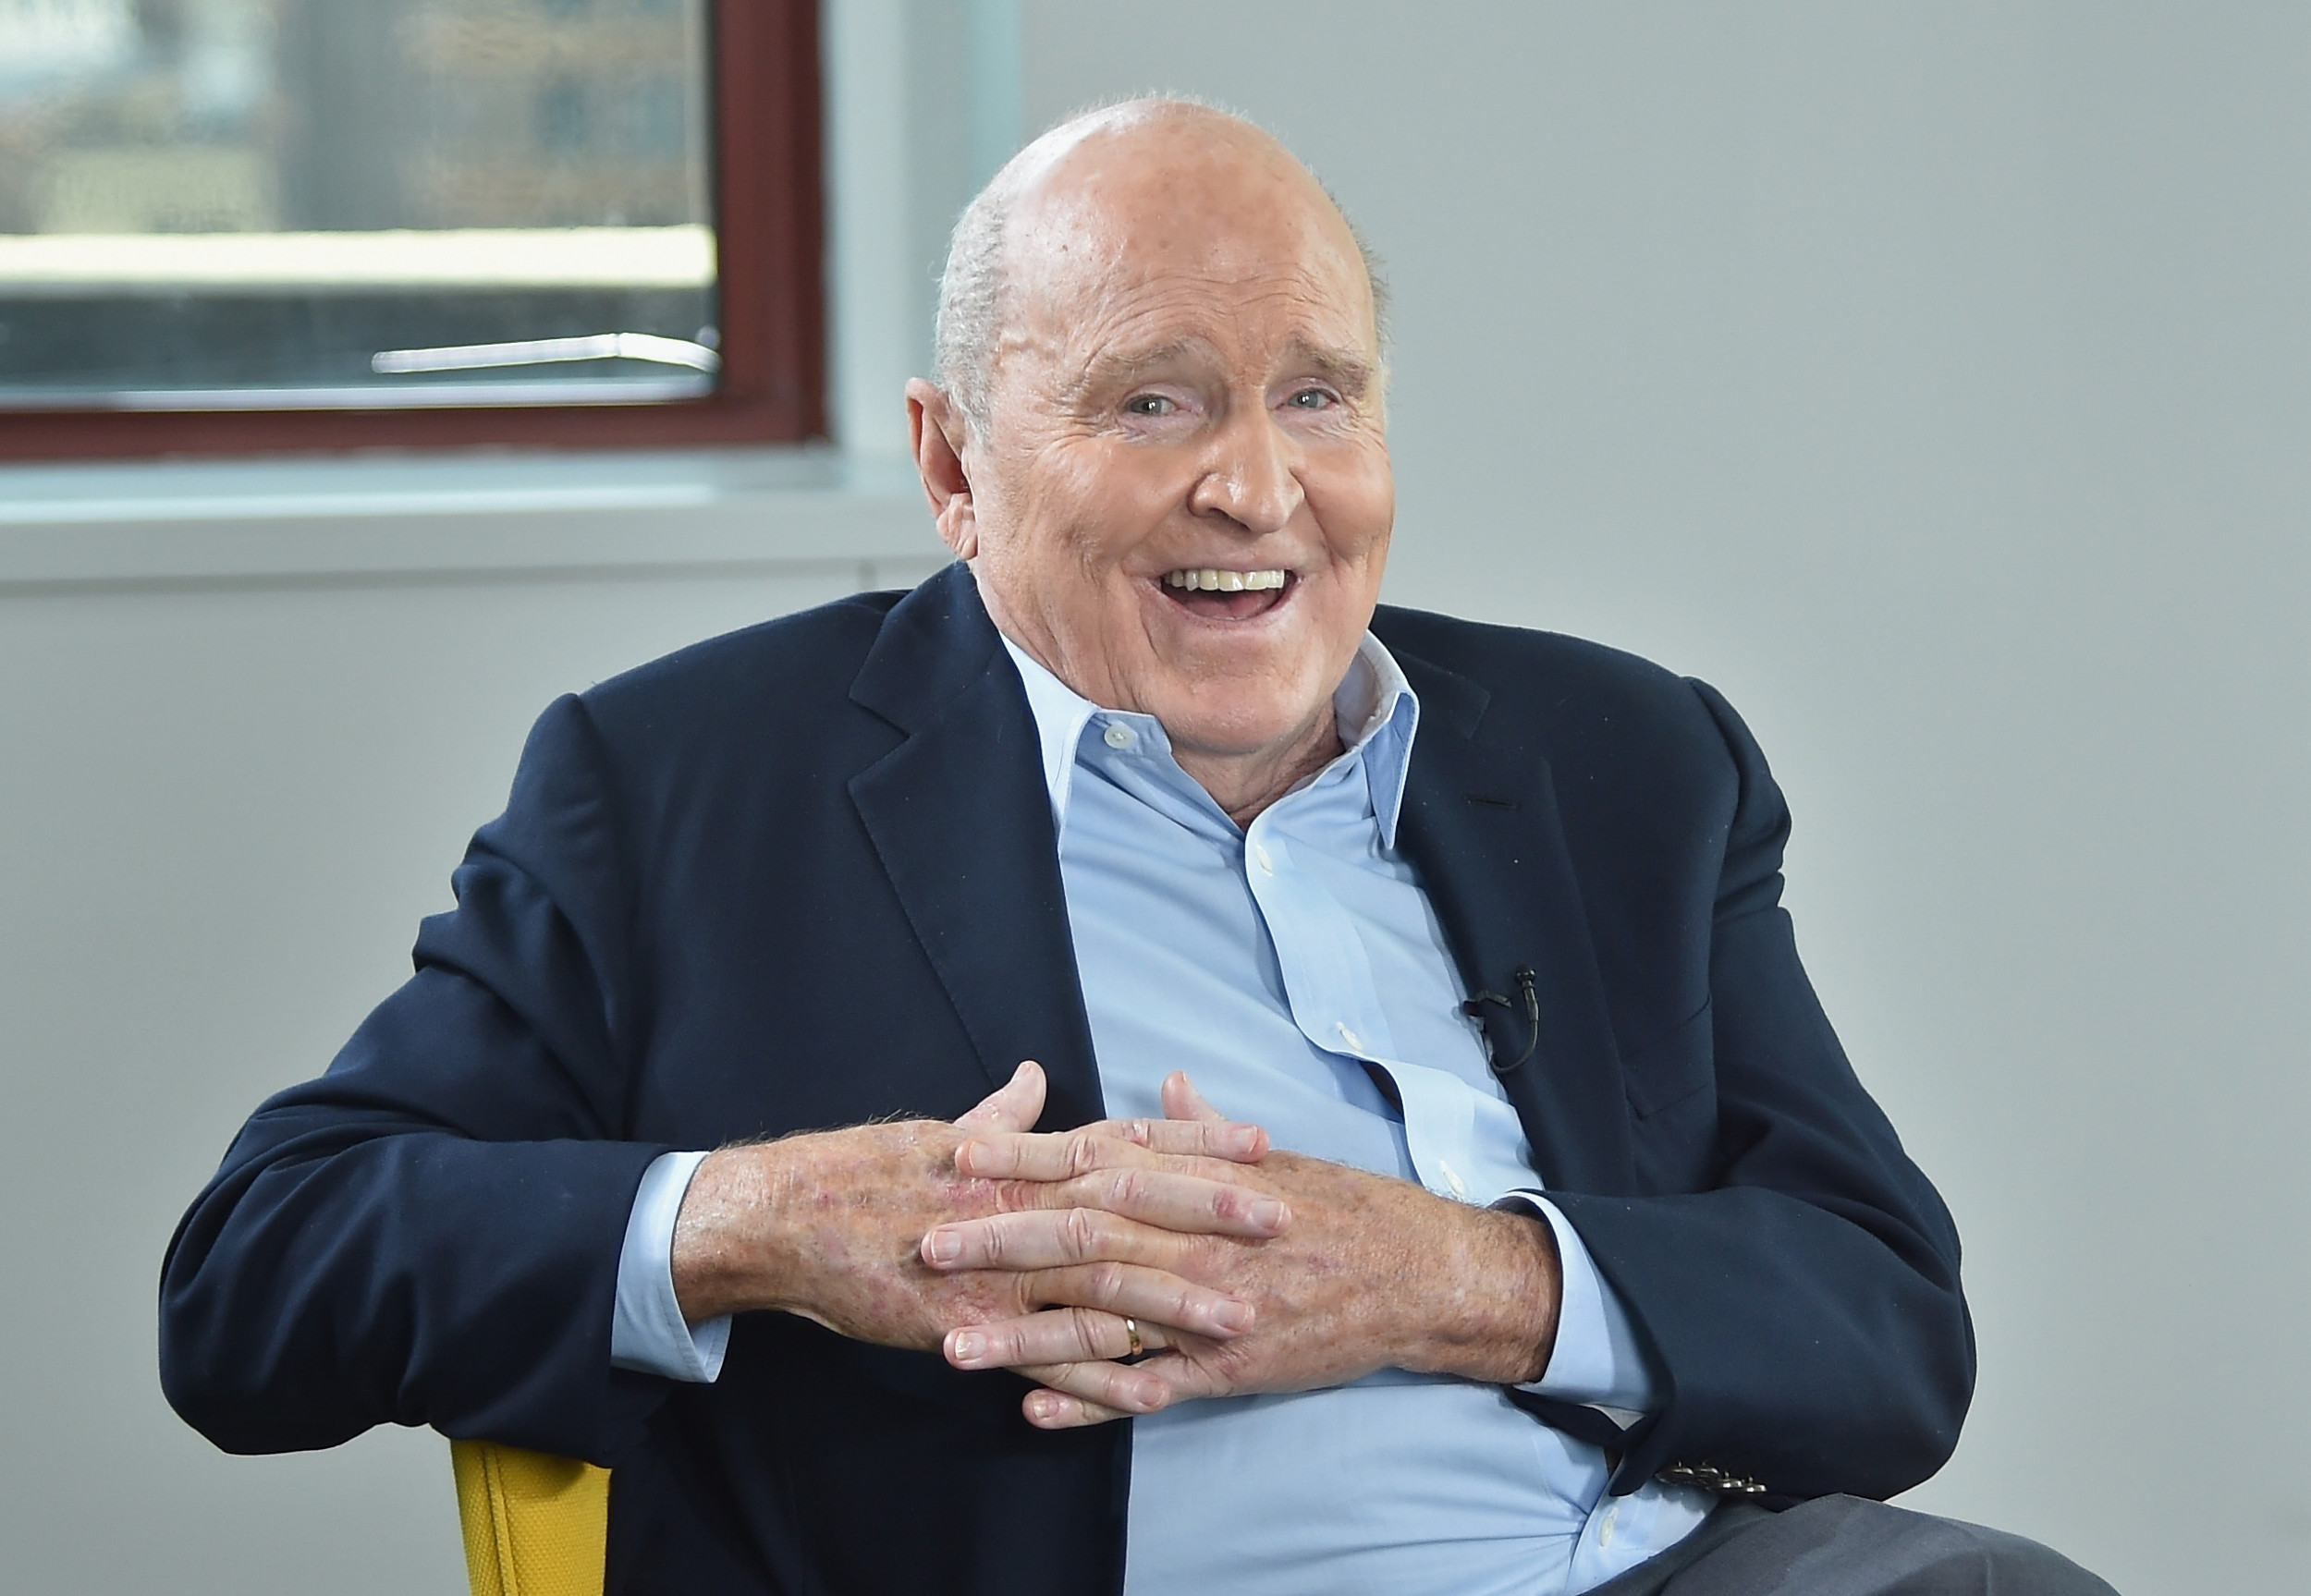 Jack Welch Is The Ceo Of General